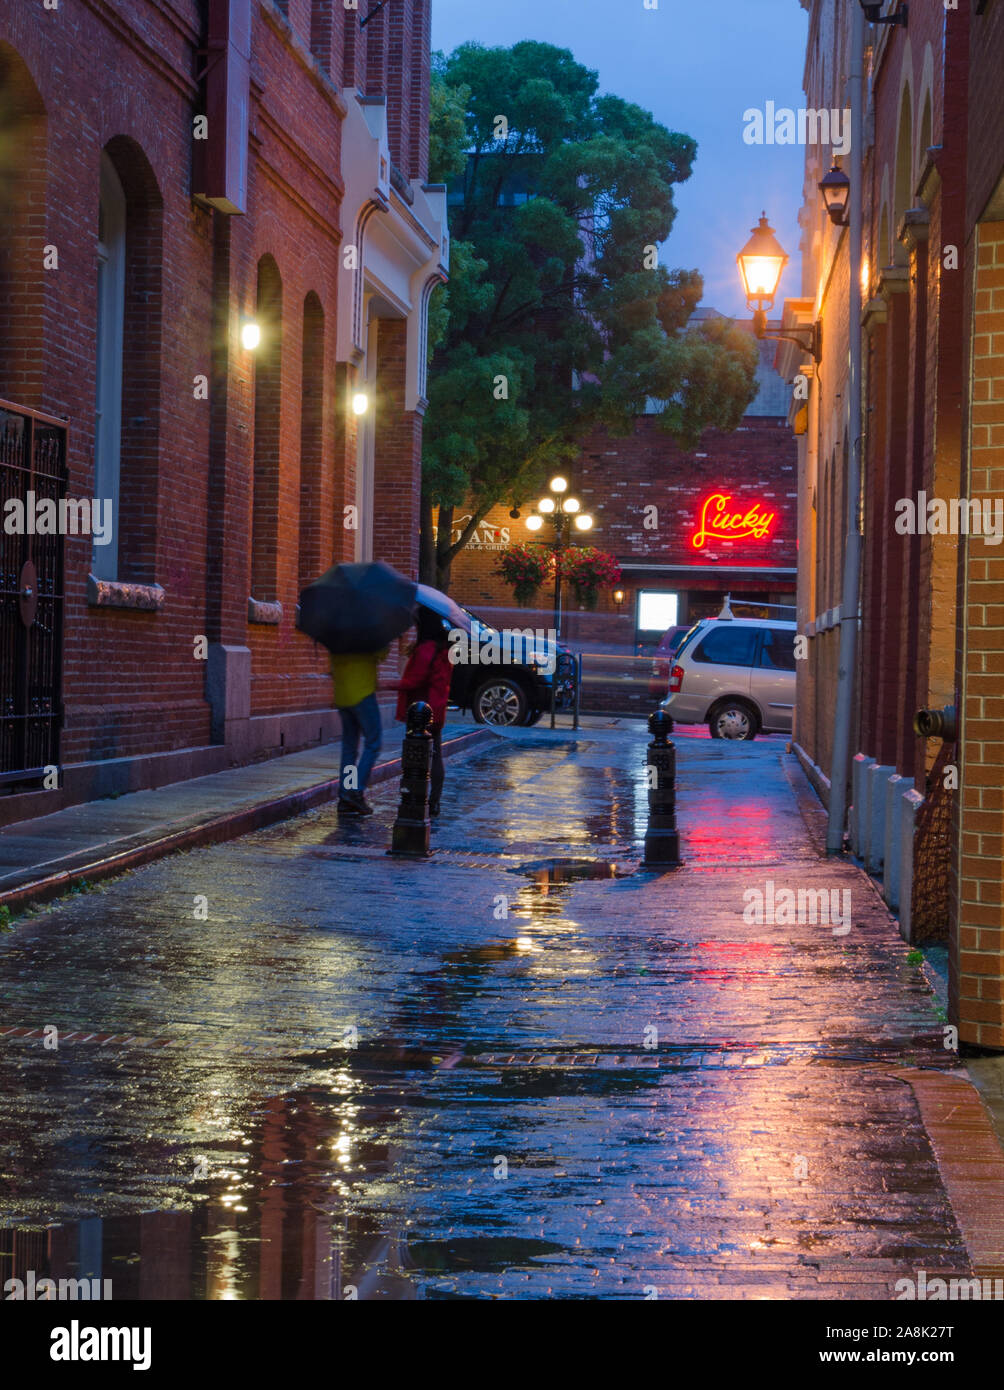 An intimate encounter in a rainy back alley in Victoria, BC, Canada. Stock Photo